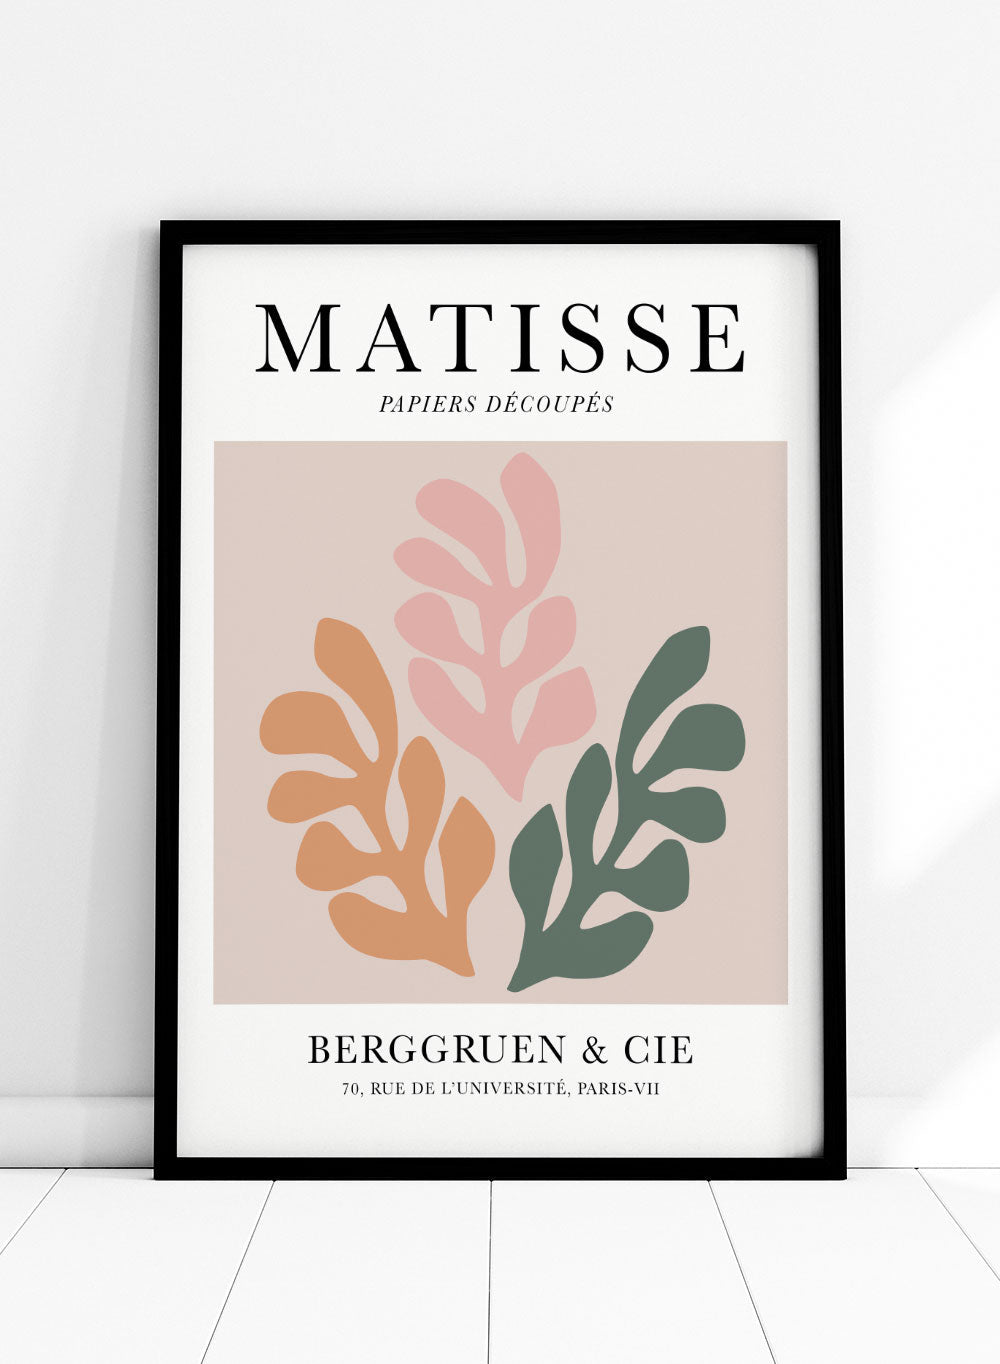 Henri Matisse, The Cut-Outs Series - Exhibition Poster No. 8